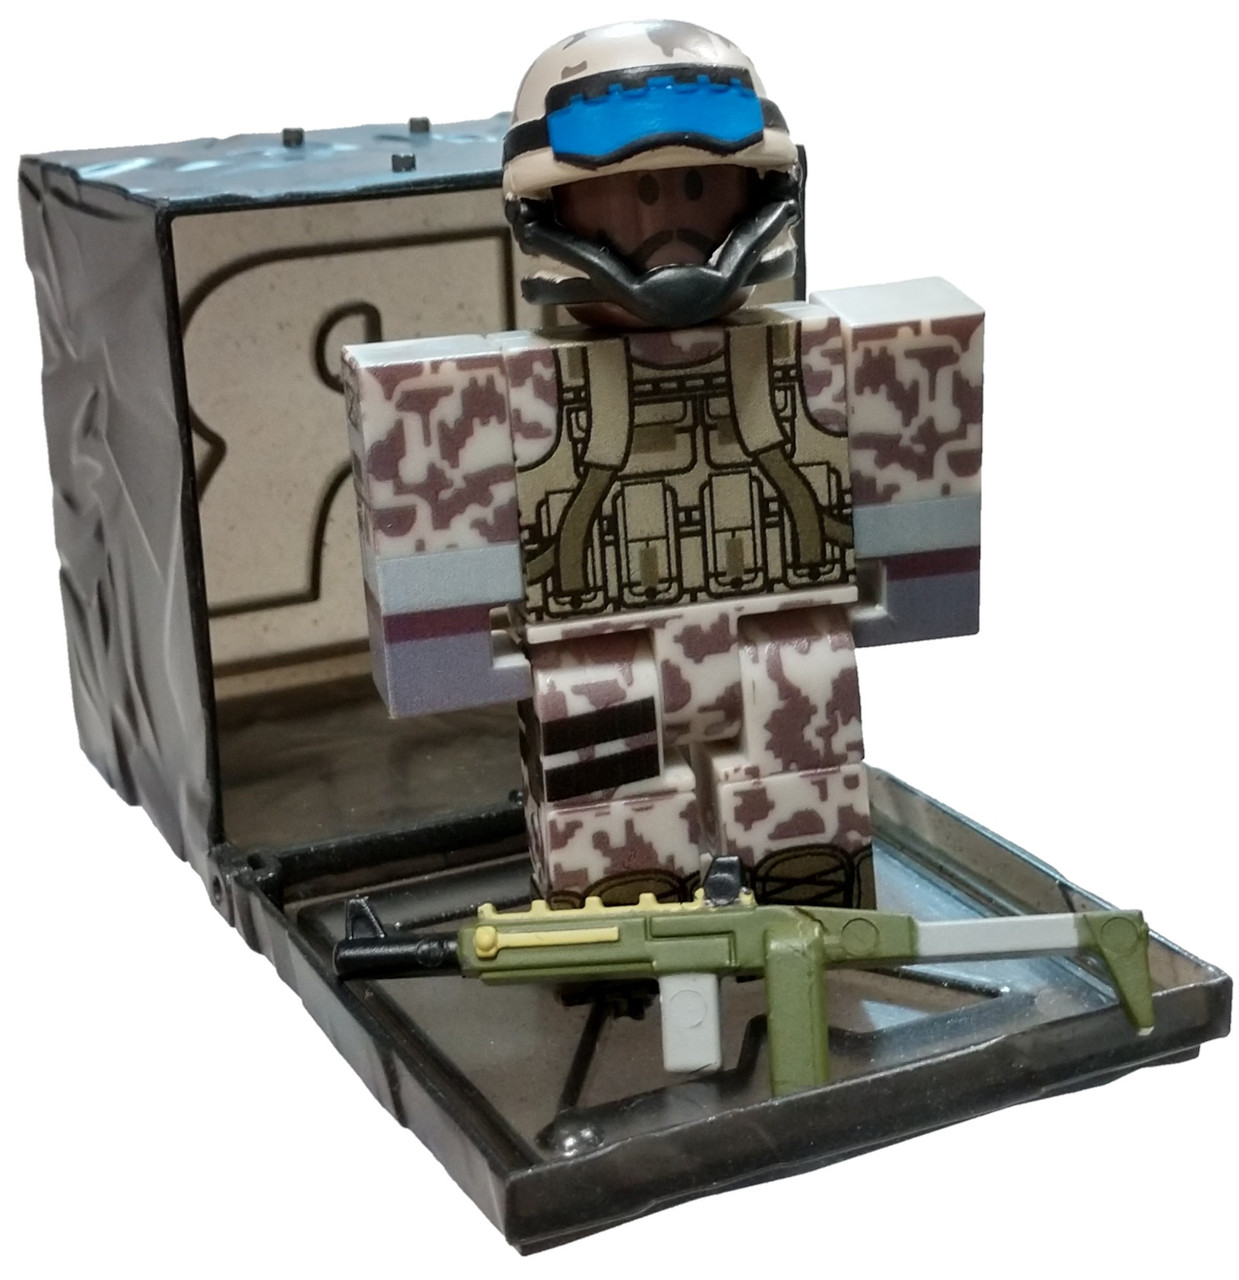 Roblox Series 7 After The Flash Uscpf Soldier 3 Mini Figure With Black Cube And Online Code Loose Jazwares Toywiz - world war 2 soldier american roblox